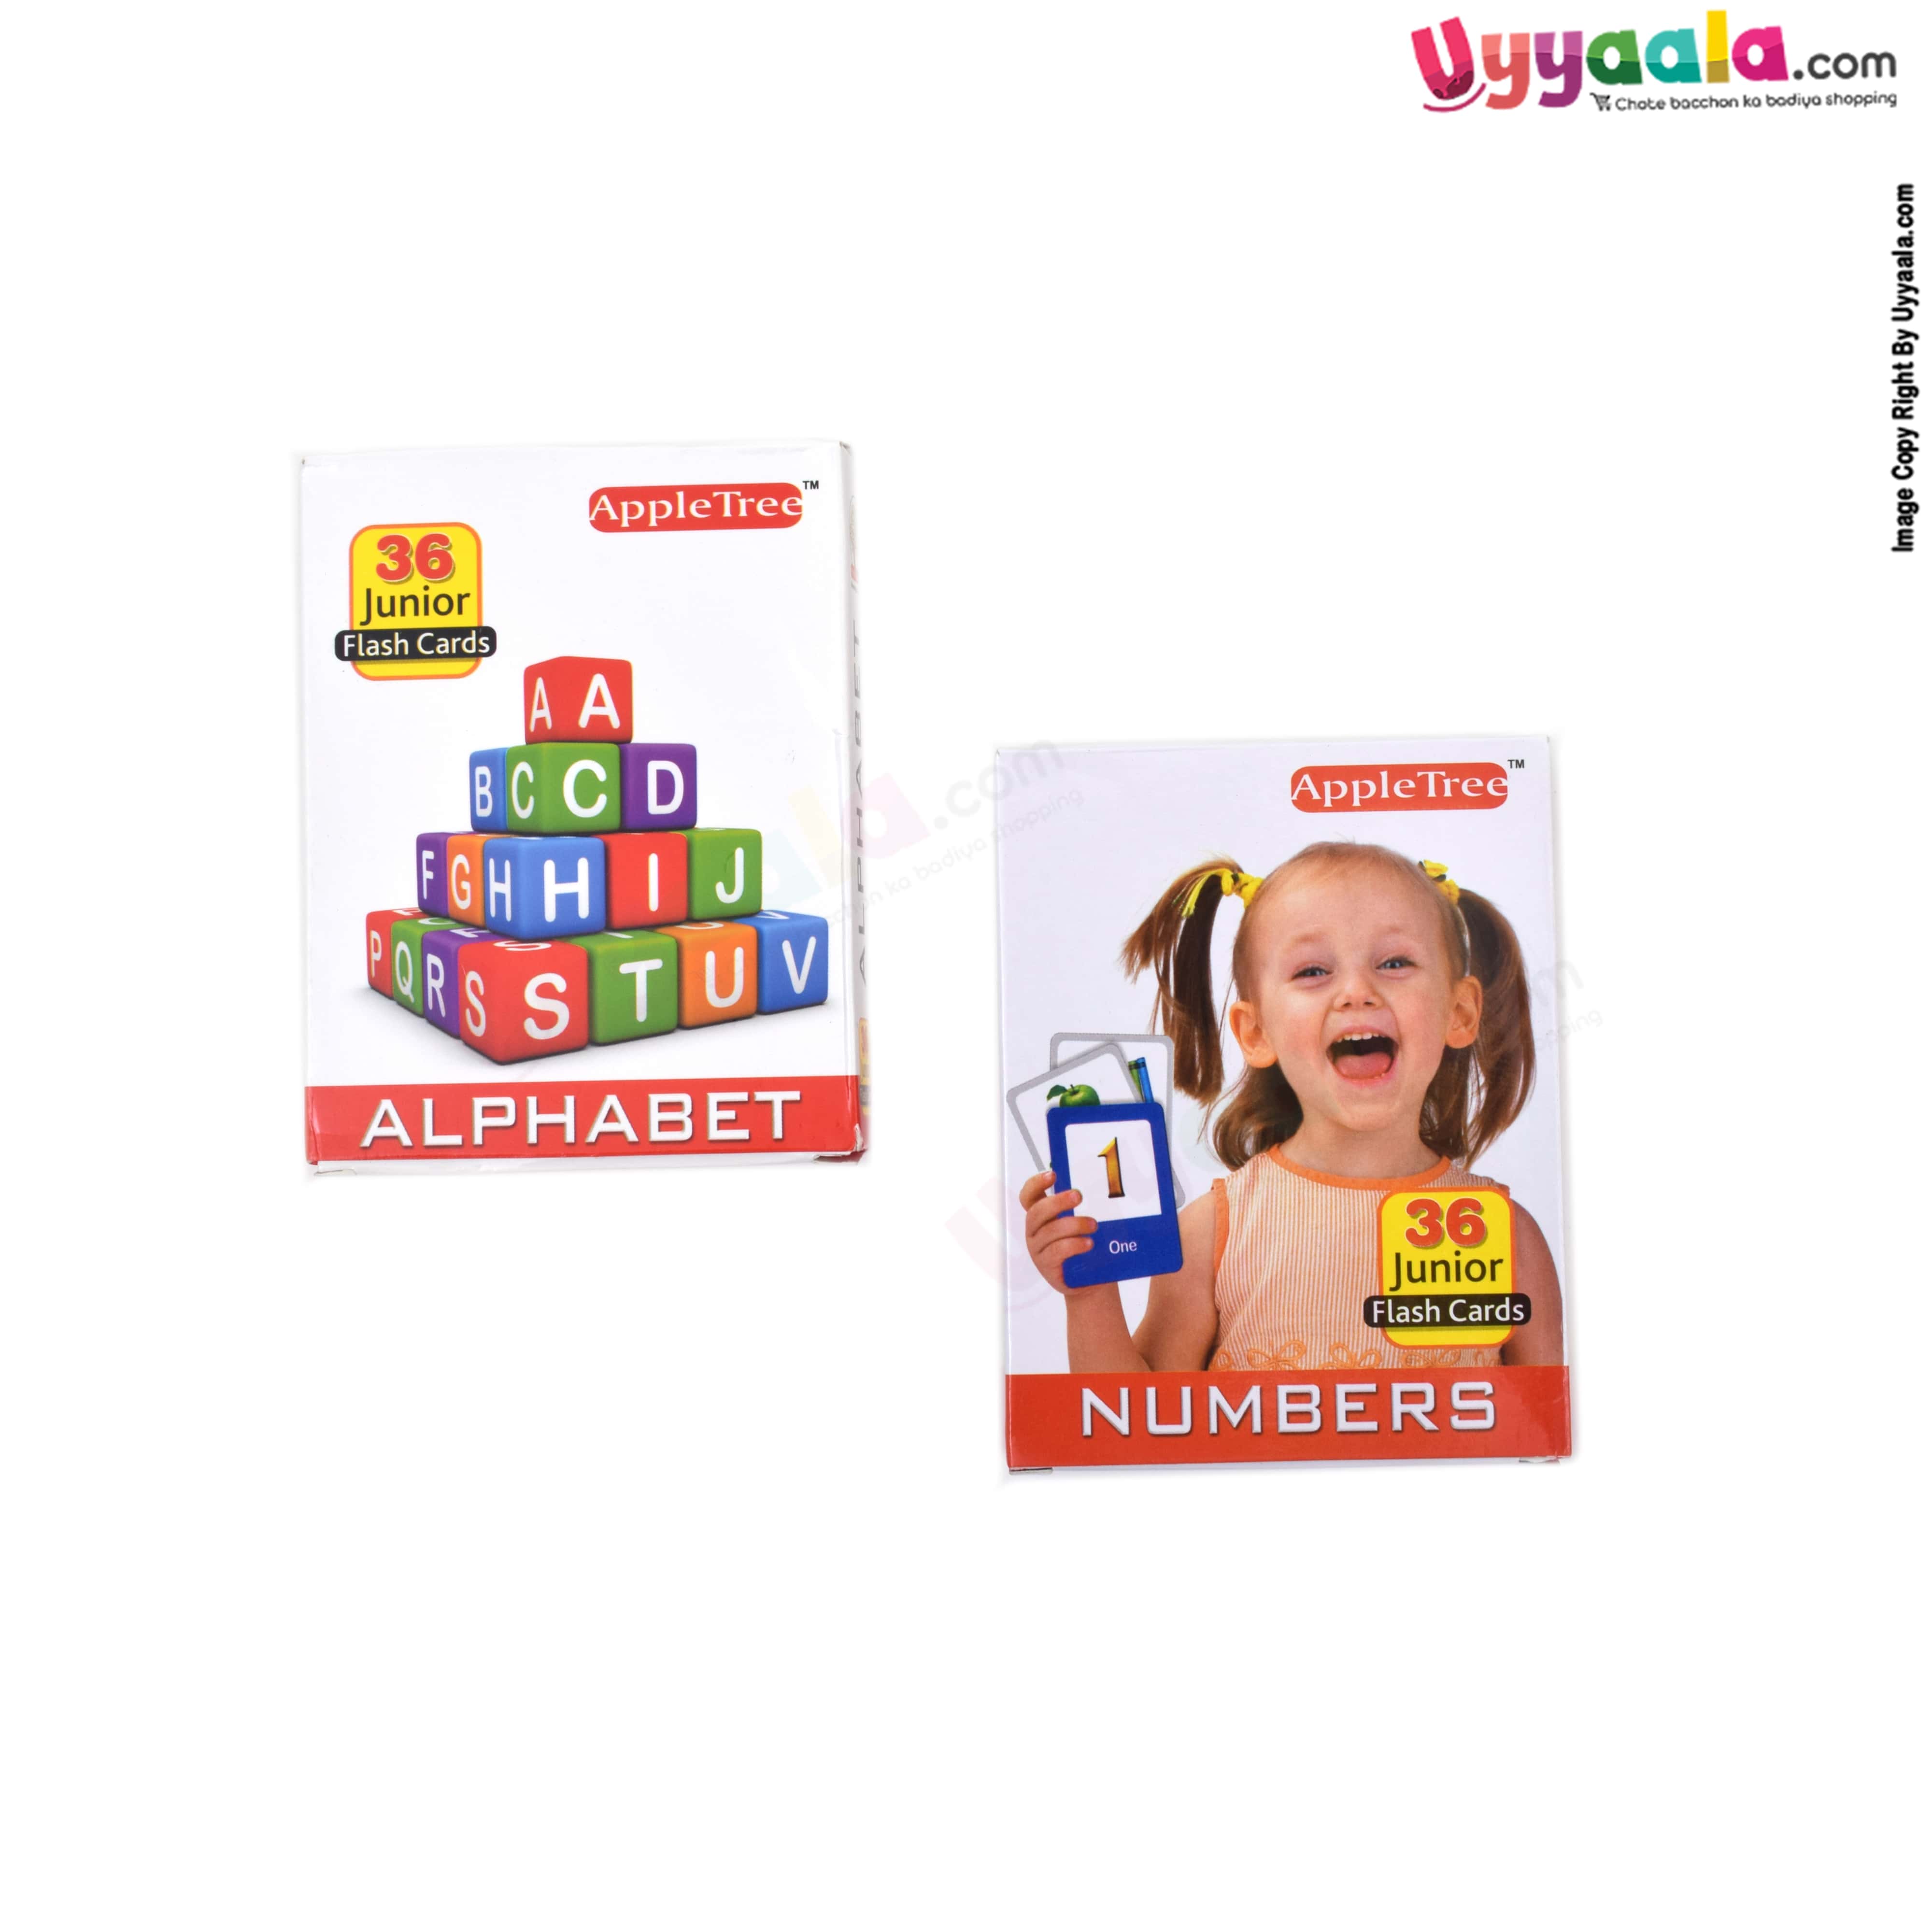 APPLE TREE junior flash cards pack of 2 - numbers & alphabets